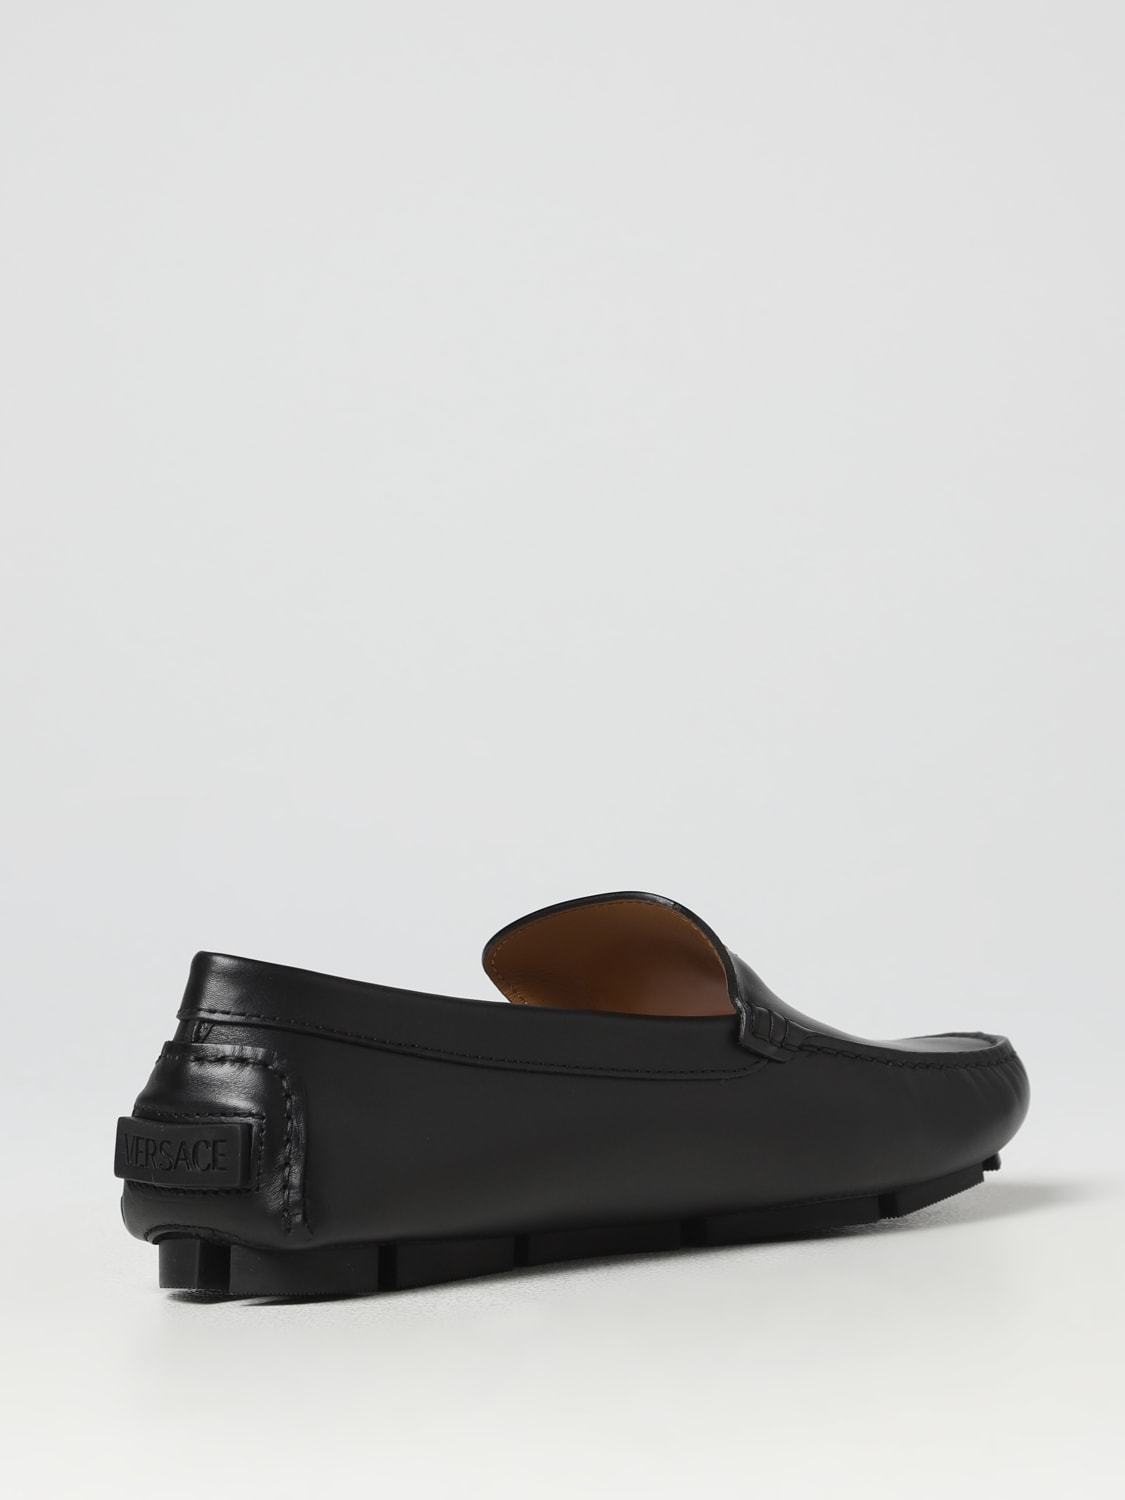 VERSACE: in leather - Black | Versace loafers 10037011A00693 at GIGLIO.COM